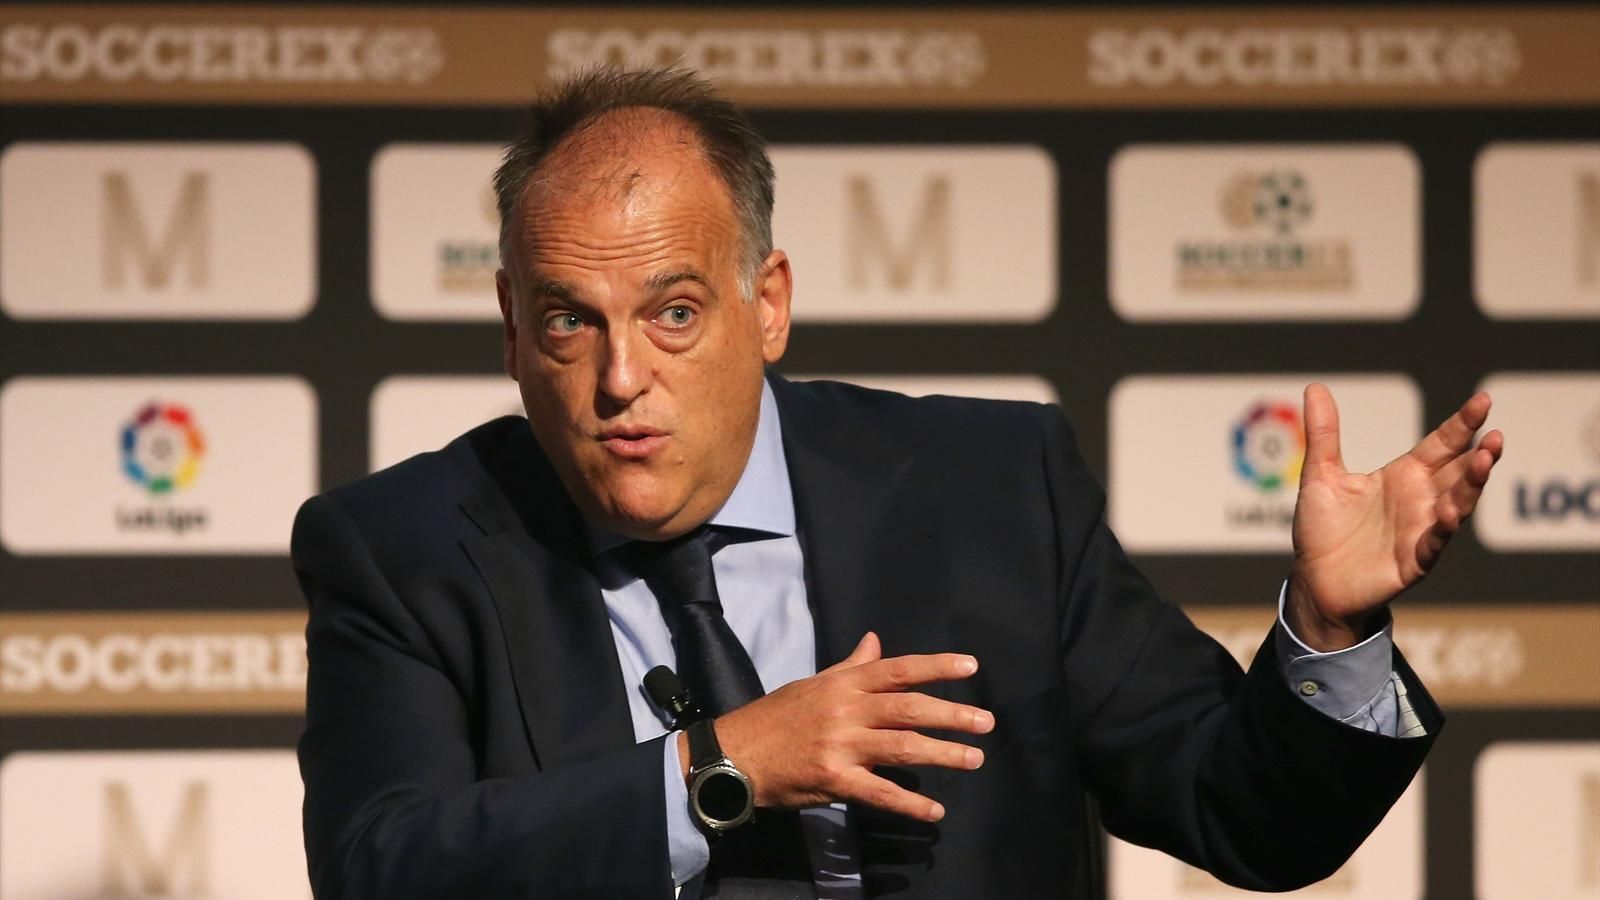 Tebas gave hopes to Barcelona and Real Madrid fans  